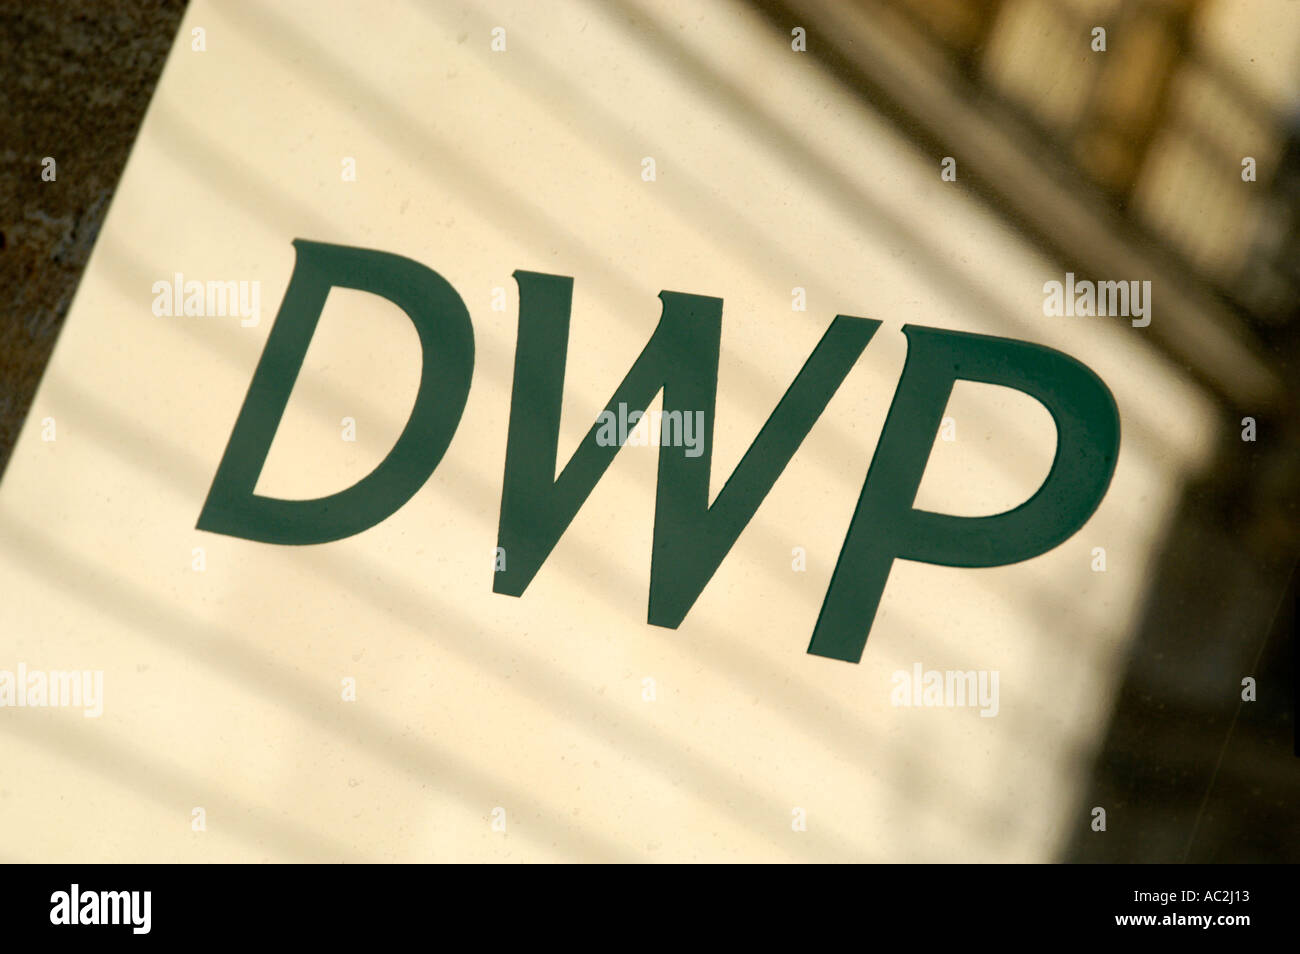 Department for Work and Pensions, London, England, UK Stockfoto